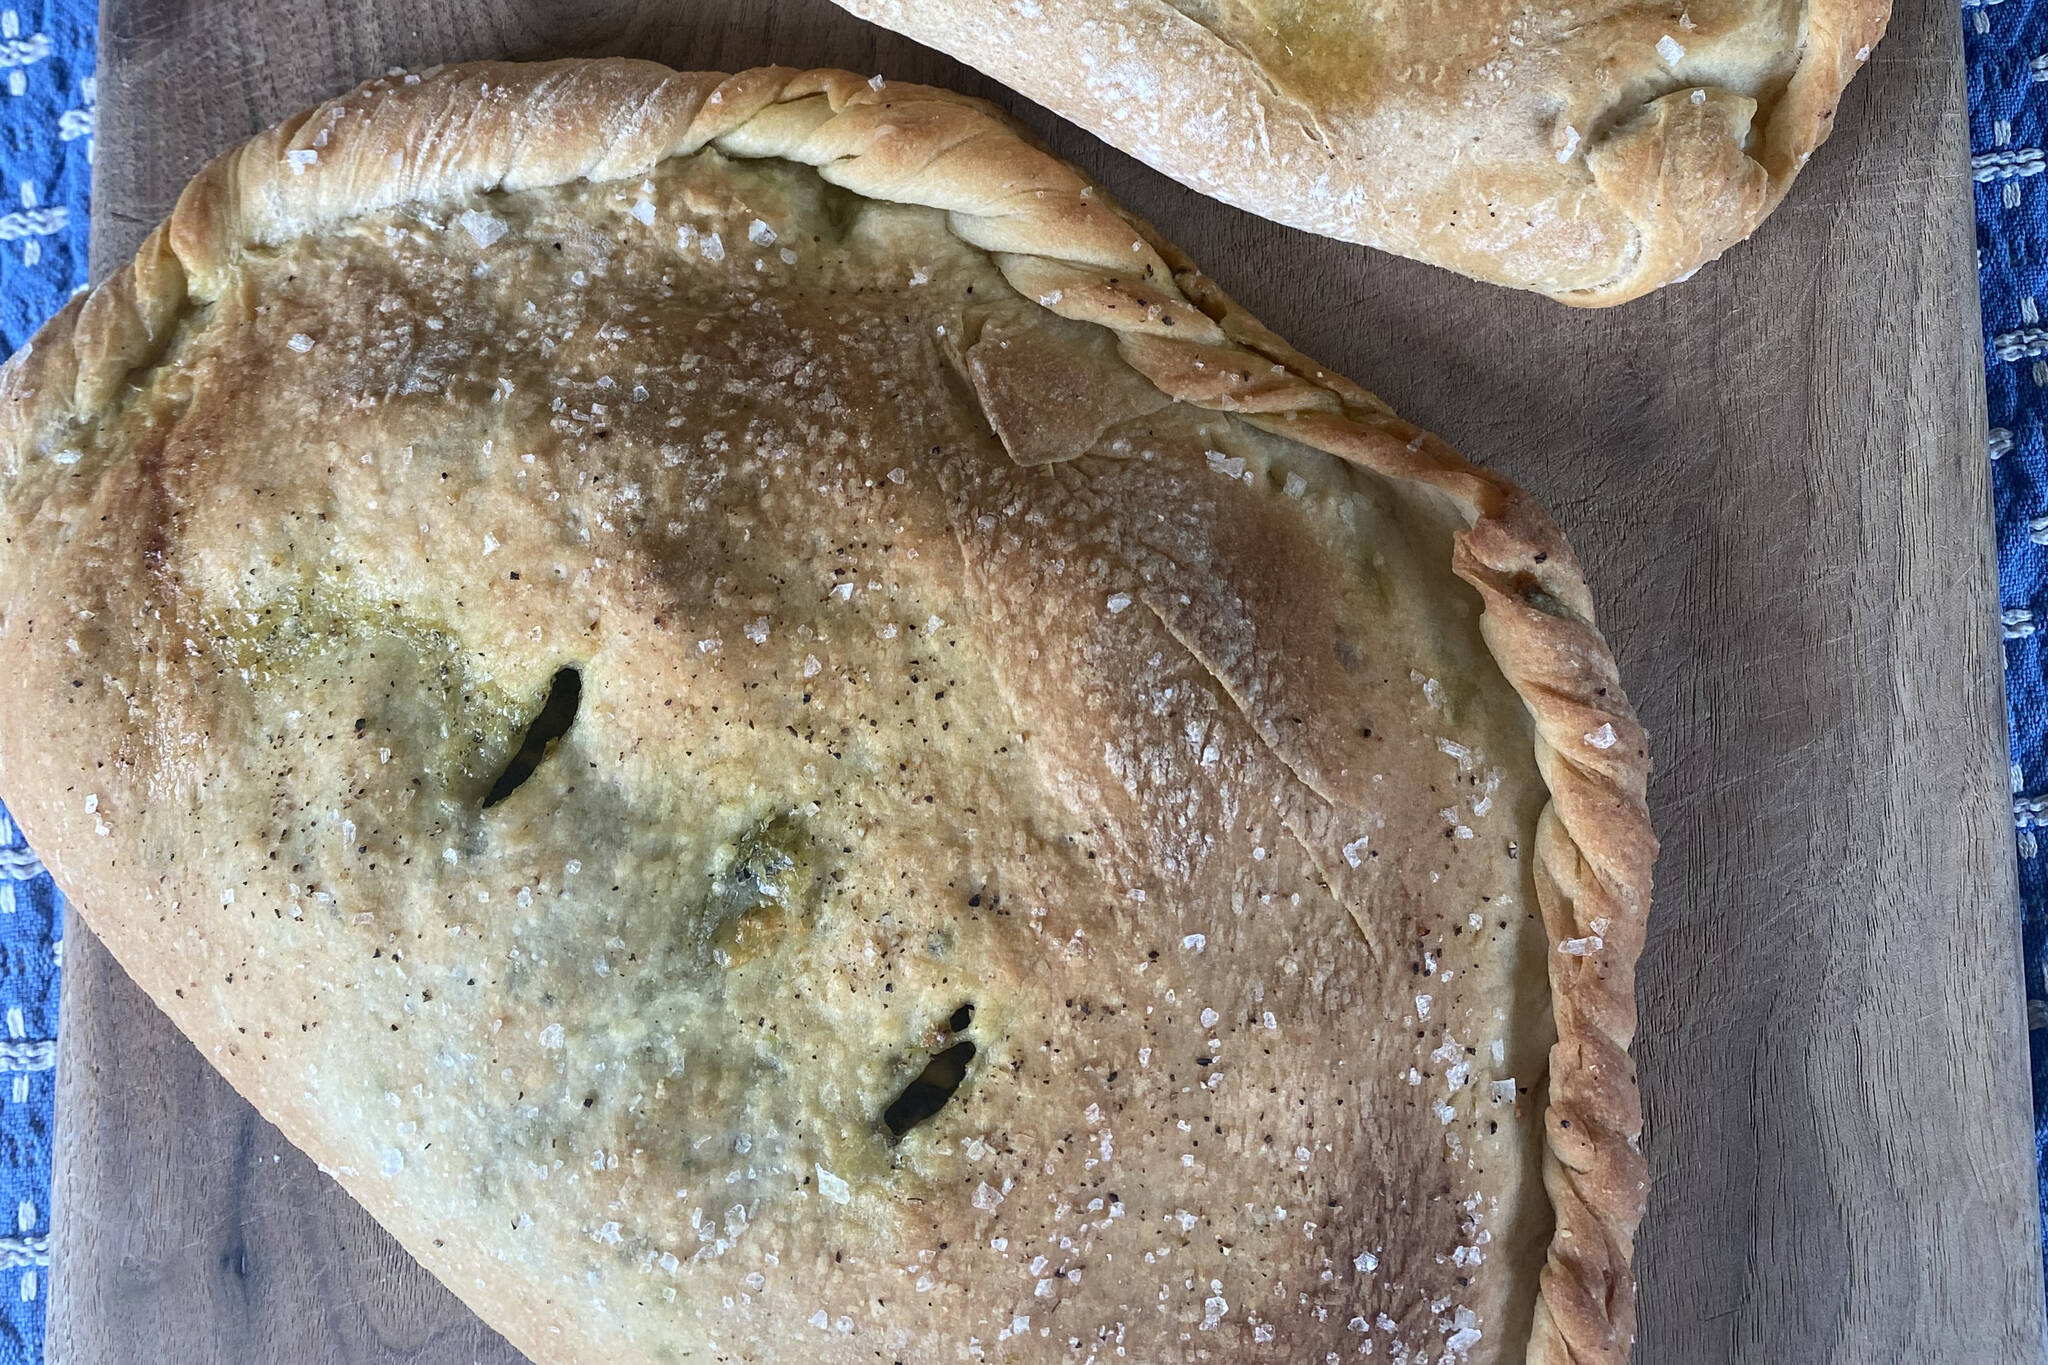 Calzones stuffed with arugula pesto and cheese make for a fun summer meal. (Photo by Tressa Dale/Peninsula Clarion)